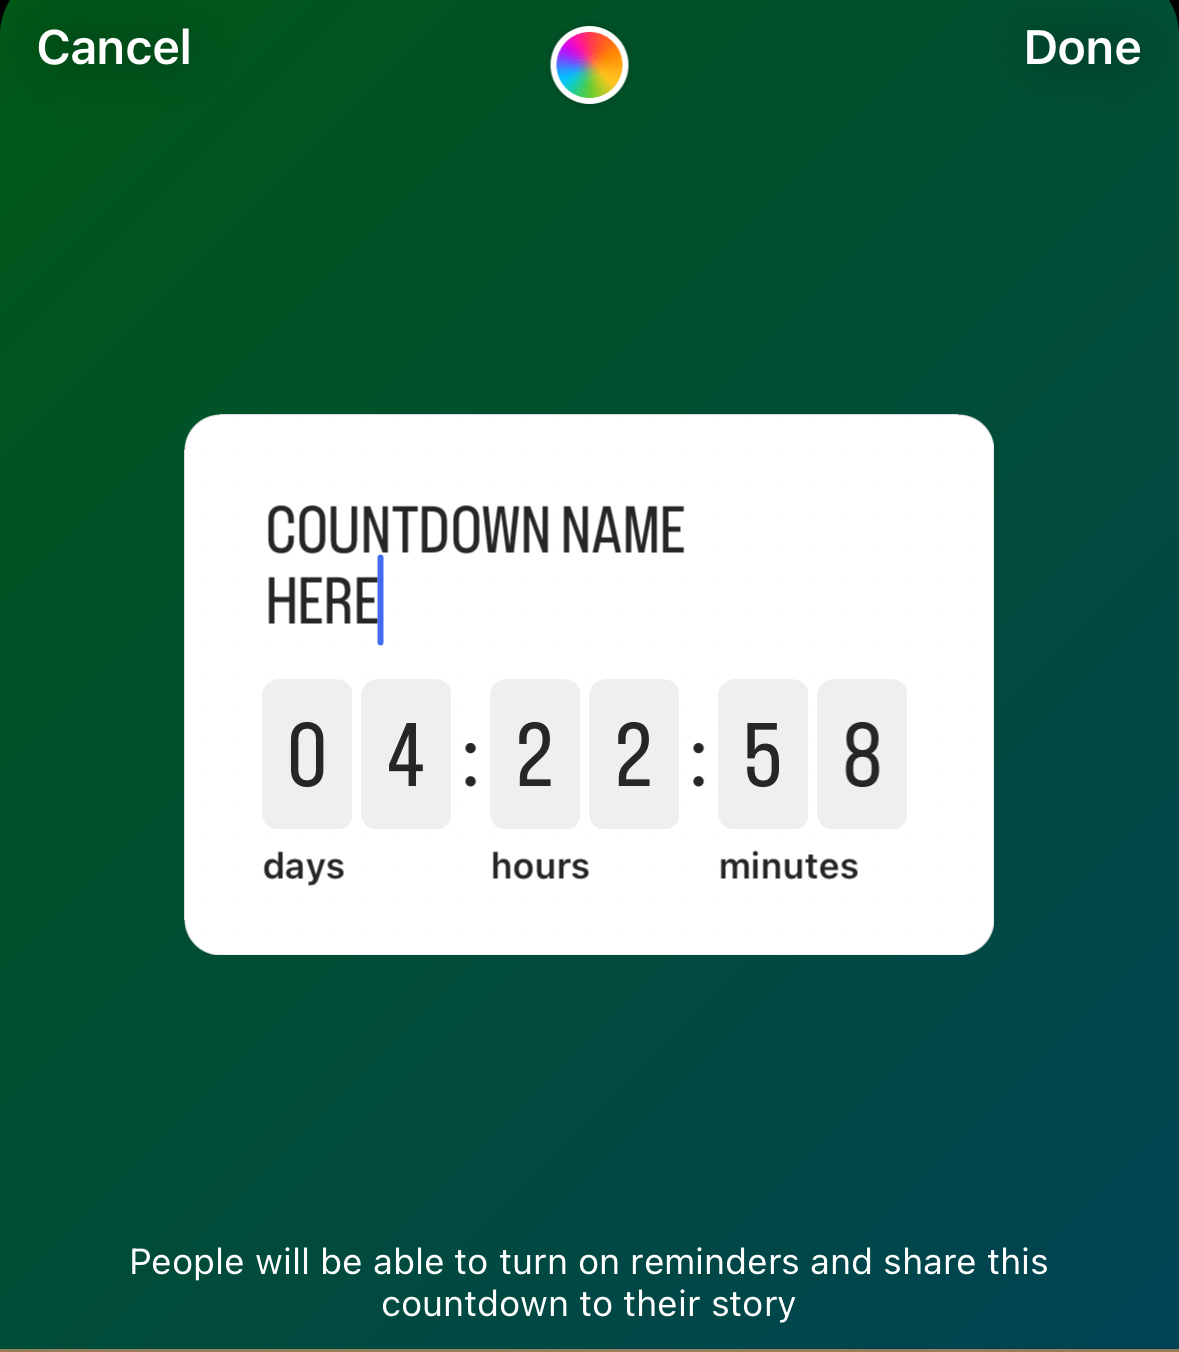 A screenshot showing an example of a countdown in an Instagram story.